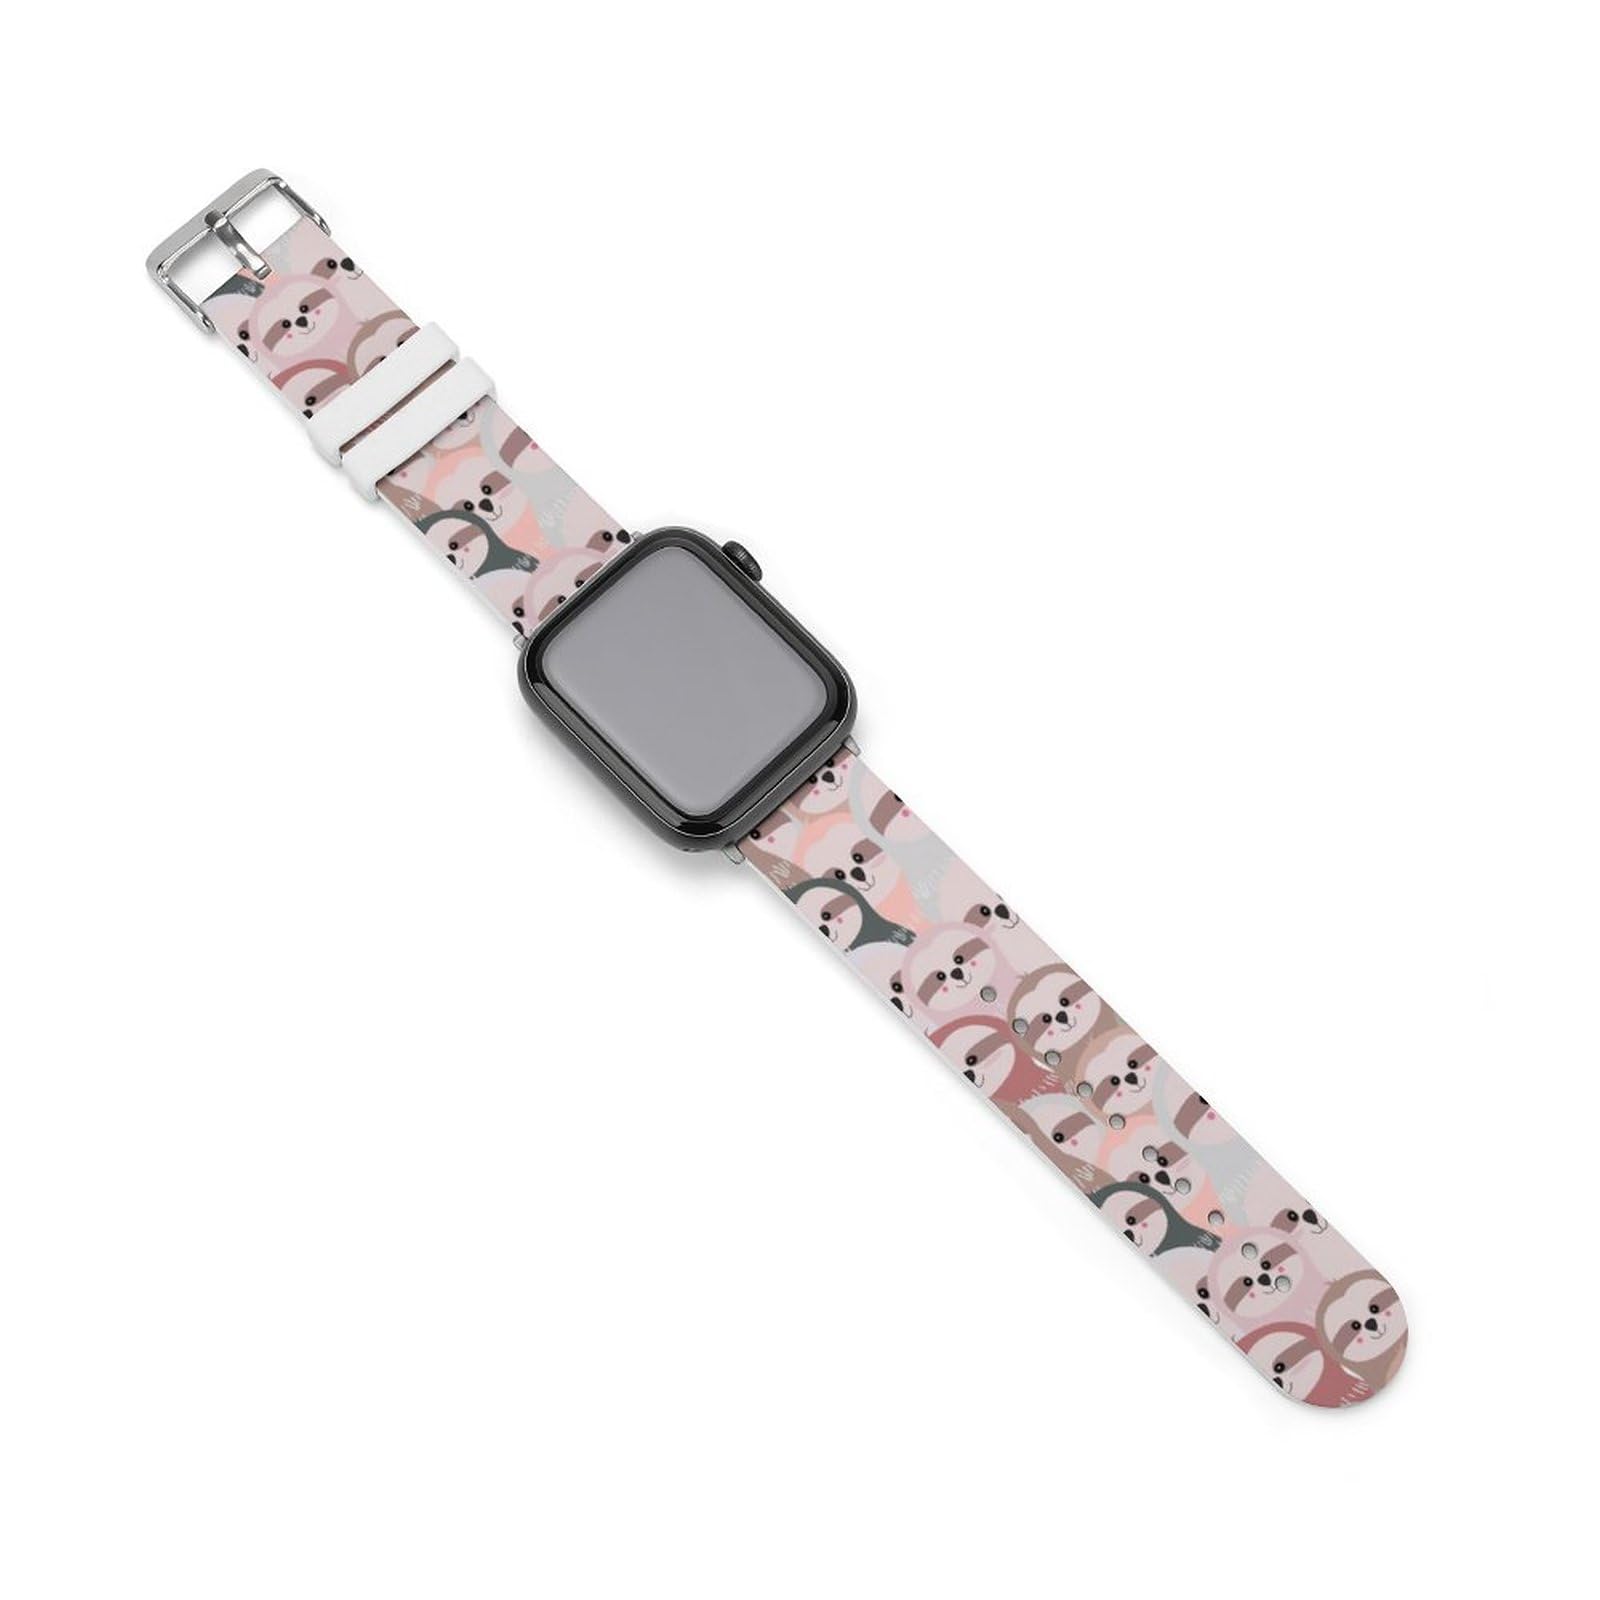 Cute Lovely Funny Sloth Silicone Strap Sports Watch Bands Soft Watch Replacement Strap for Women Men